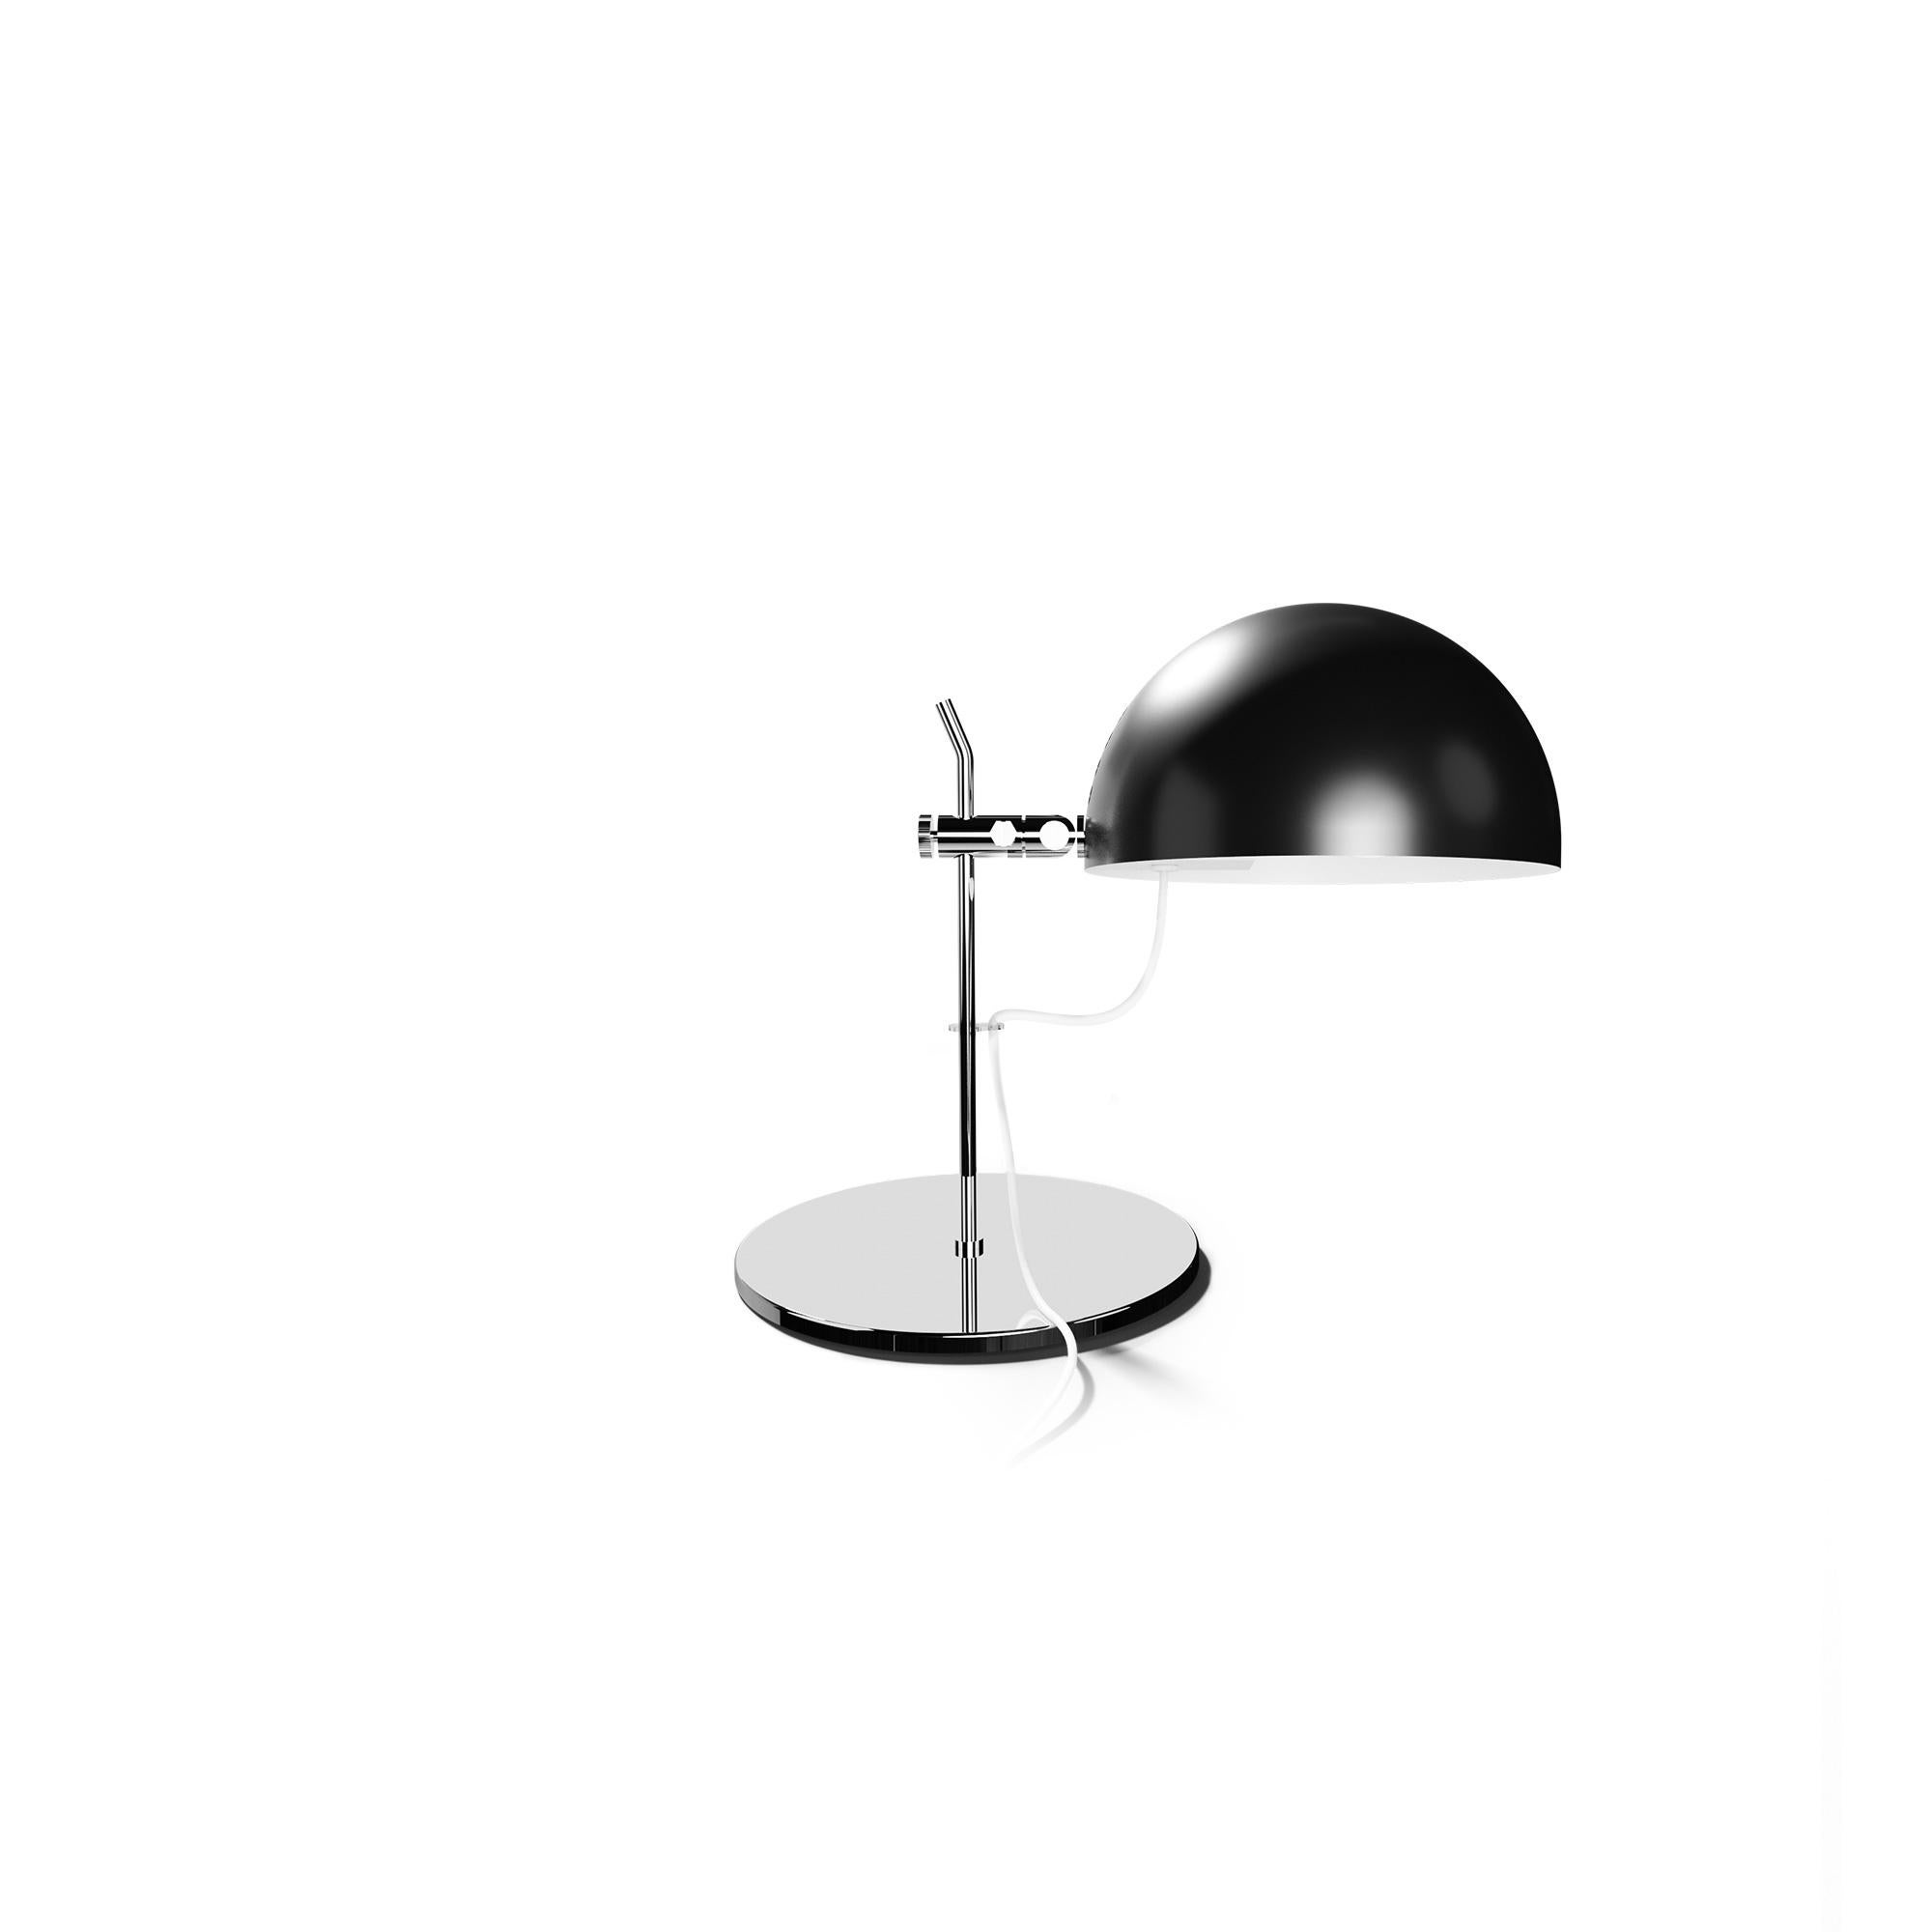 Alain Richard 'A23' Metal and Marble Floor Lamp for Disderot in Red For Sale 6